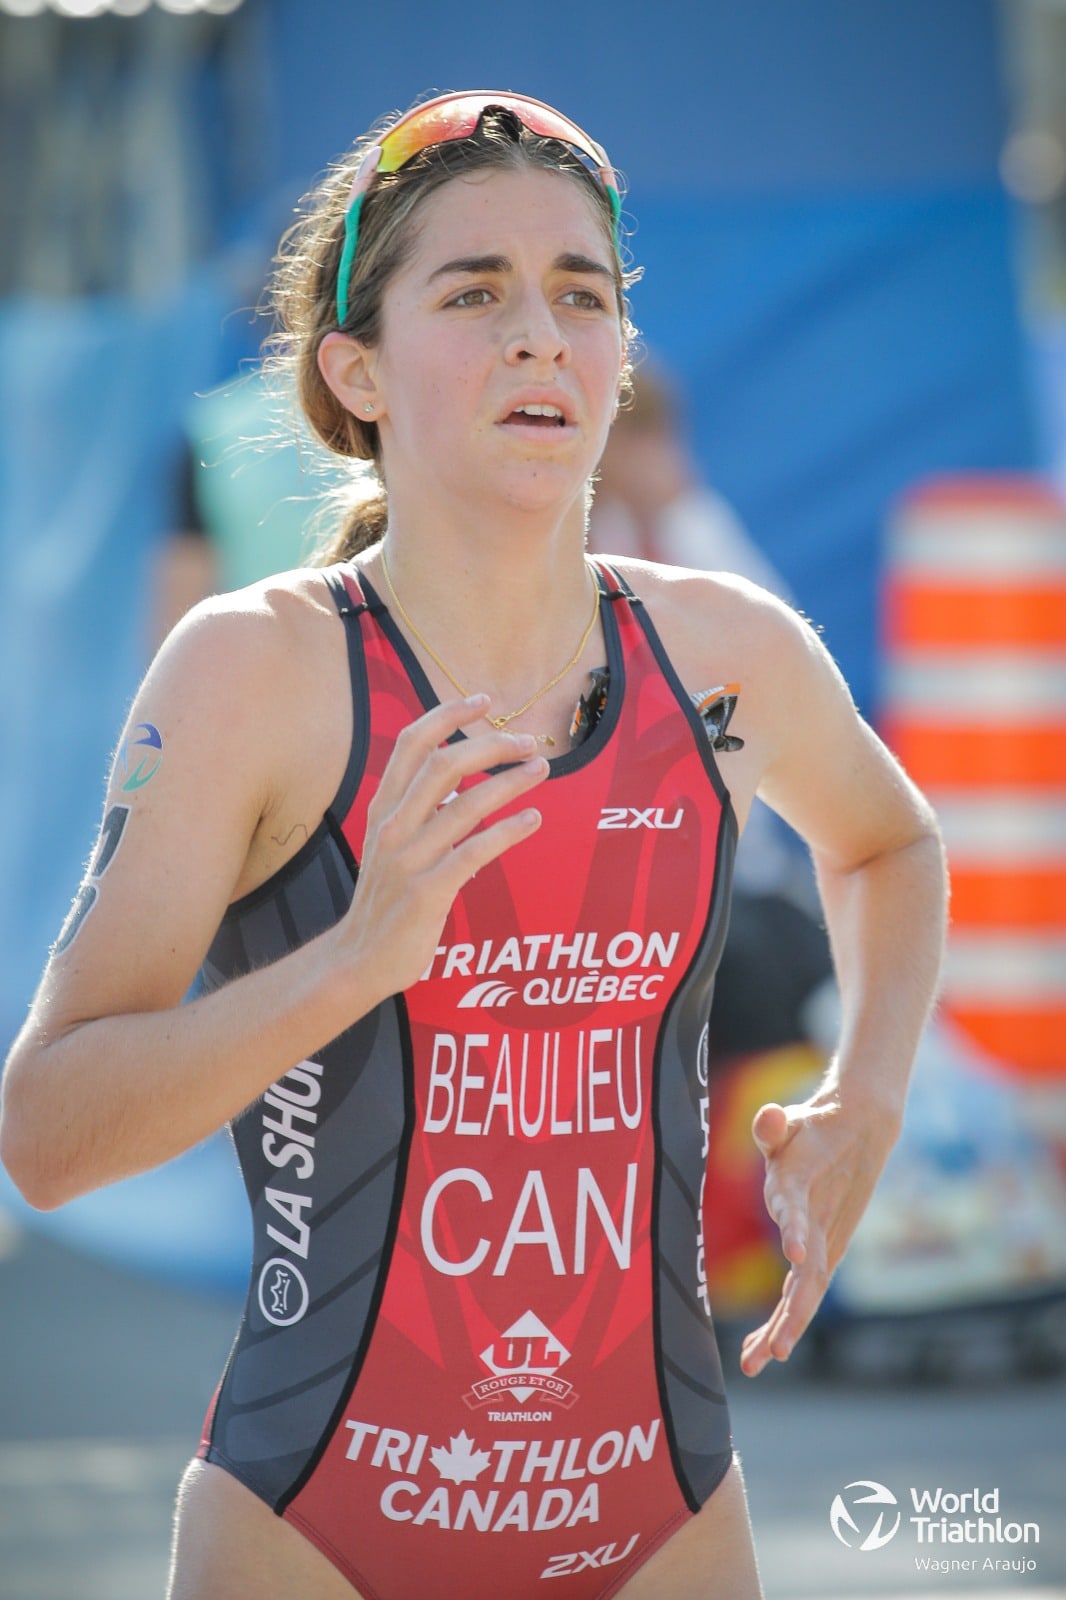 Noémie Beaulieu Leads Young Canucks into Fourth at Junior World Triathlon Sprint Championships in Montreal